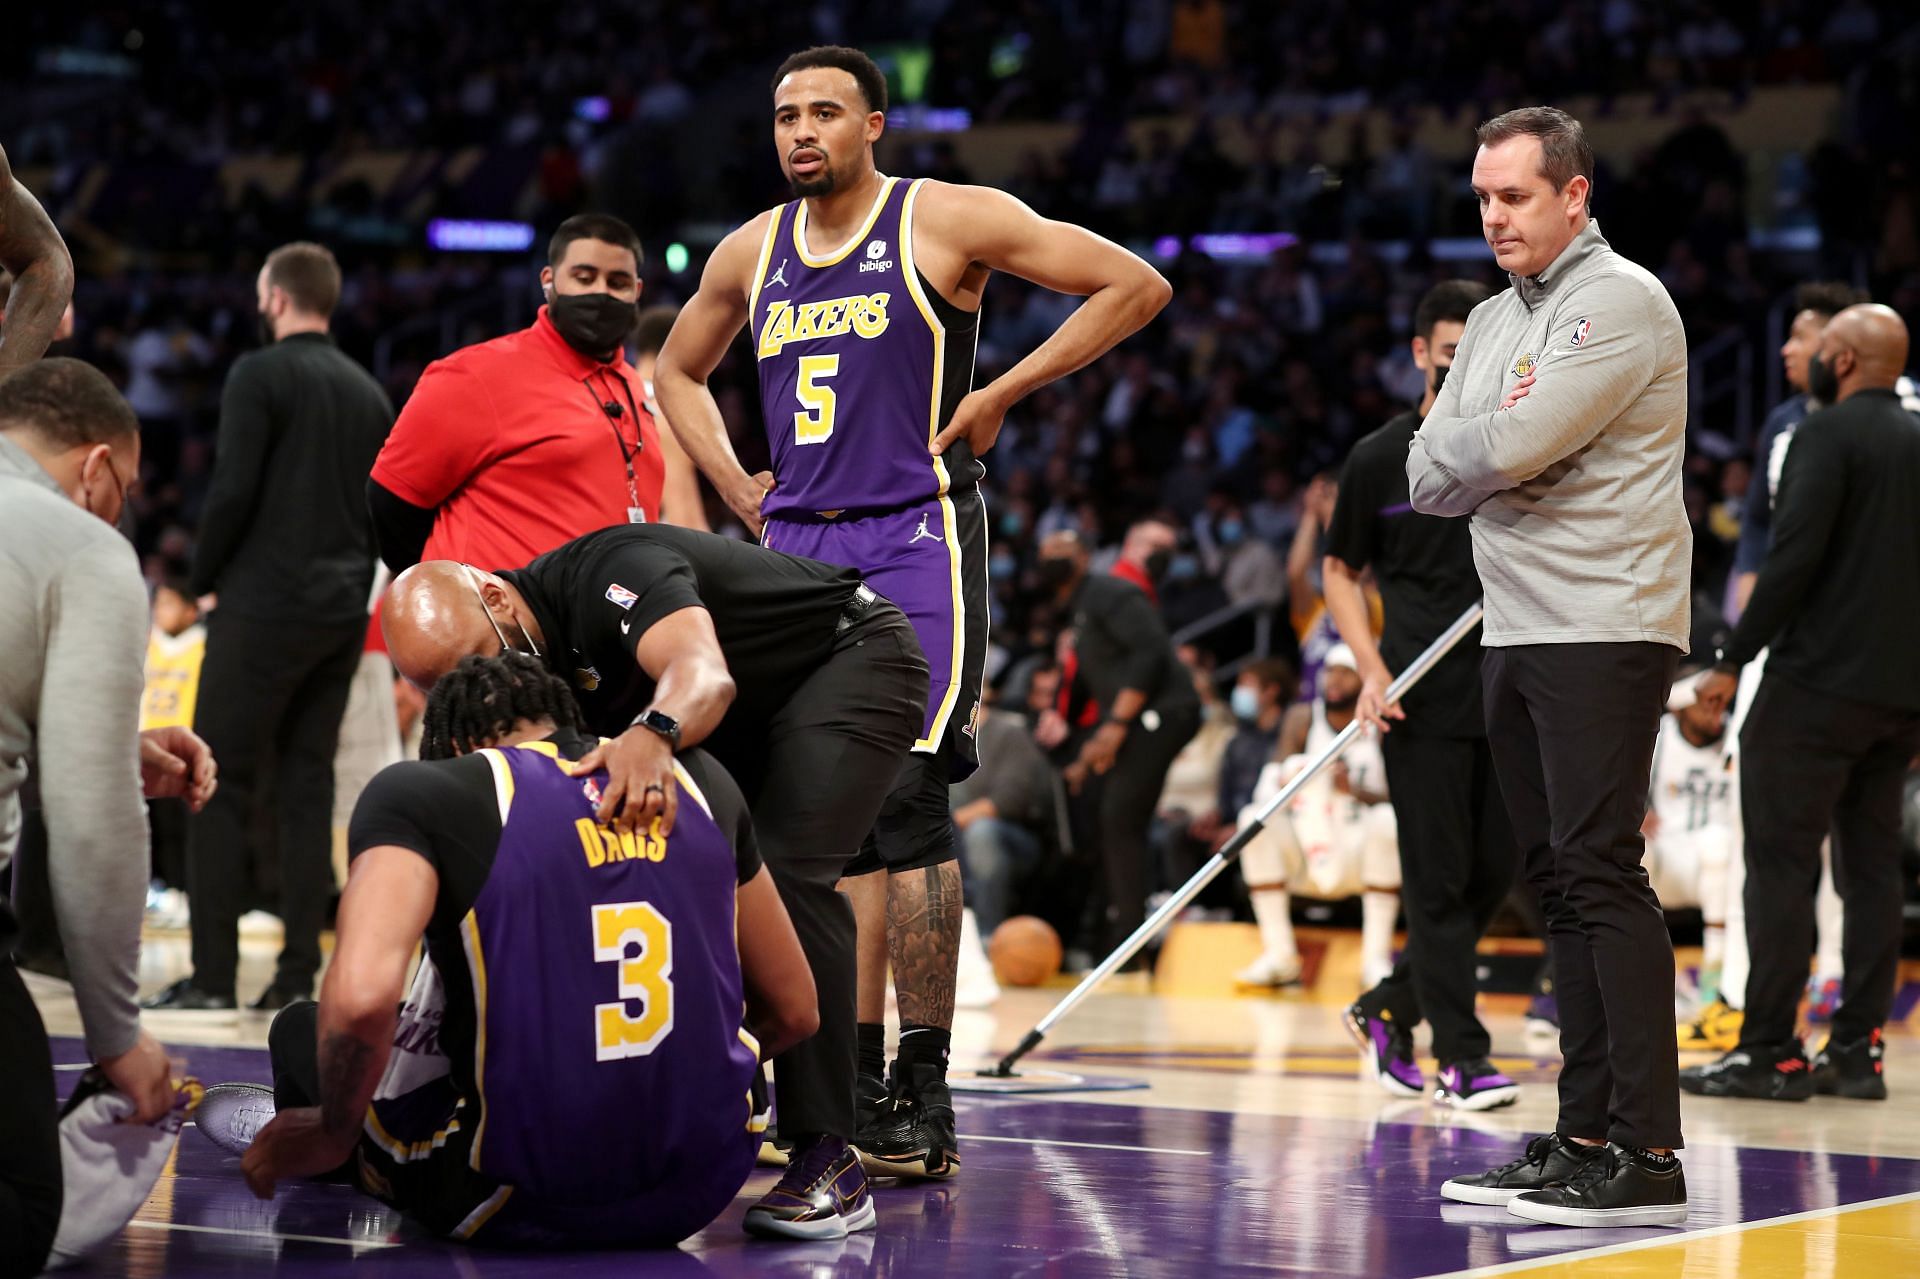 Talen Horton-Tucker (5) and coach Frank Vogel of the LA Lakers check on Anthony Davis (3) after an injury during the second quarter against the Utah Jazz at Crypto.com Arena on Feb. 16 in Los Angeles, California.